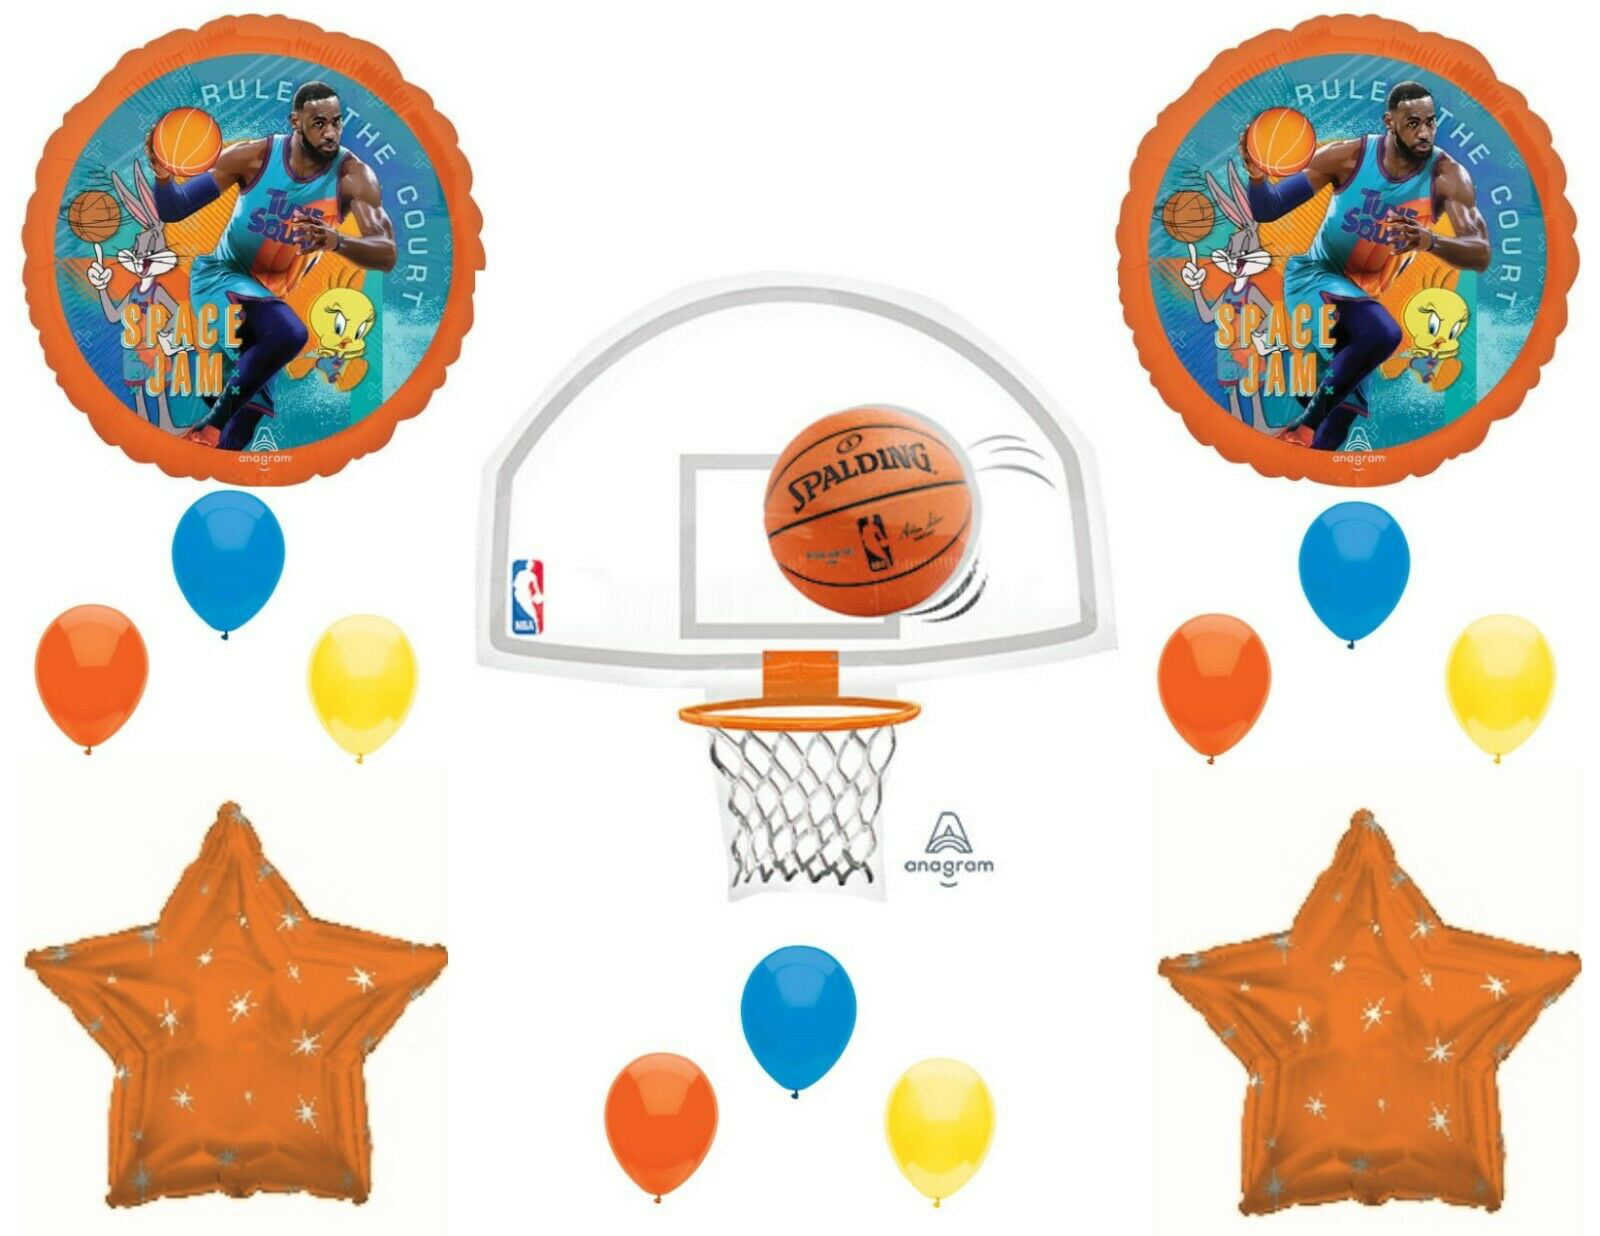 Cake Toppers Balloons Space Jam Party Supplies Basketball Birthday Party Supplies for Boys and Girls Space Jam Birthday Party Decorations Include Happy Birthday Banner Hanging Swirls